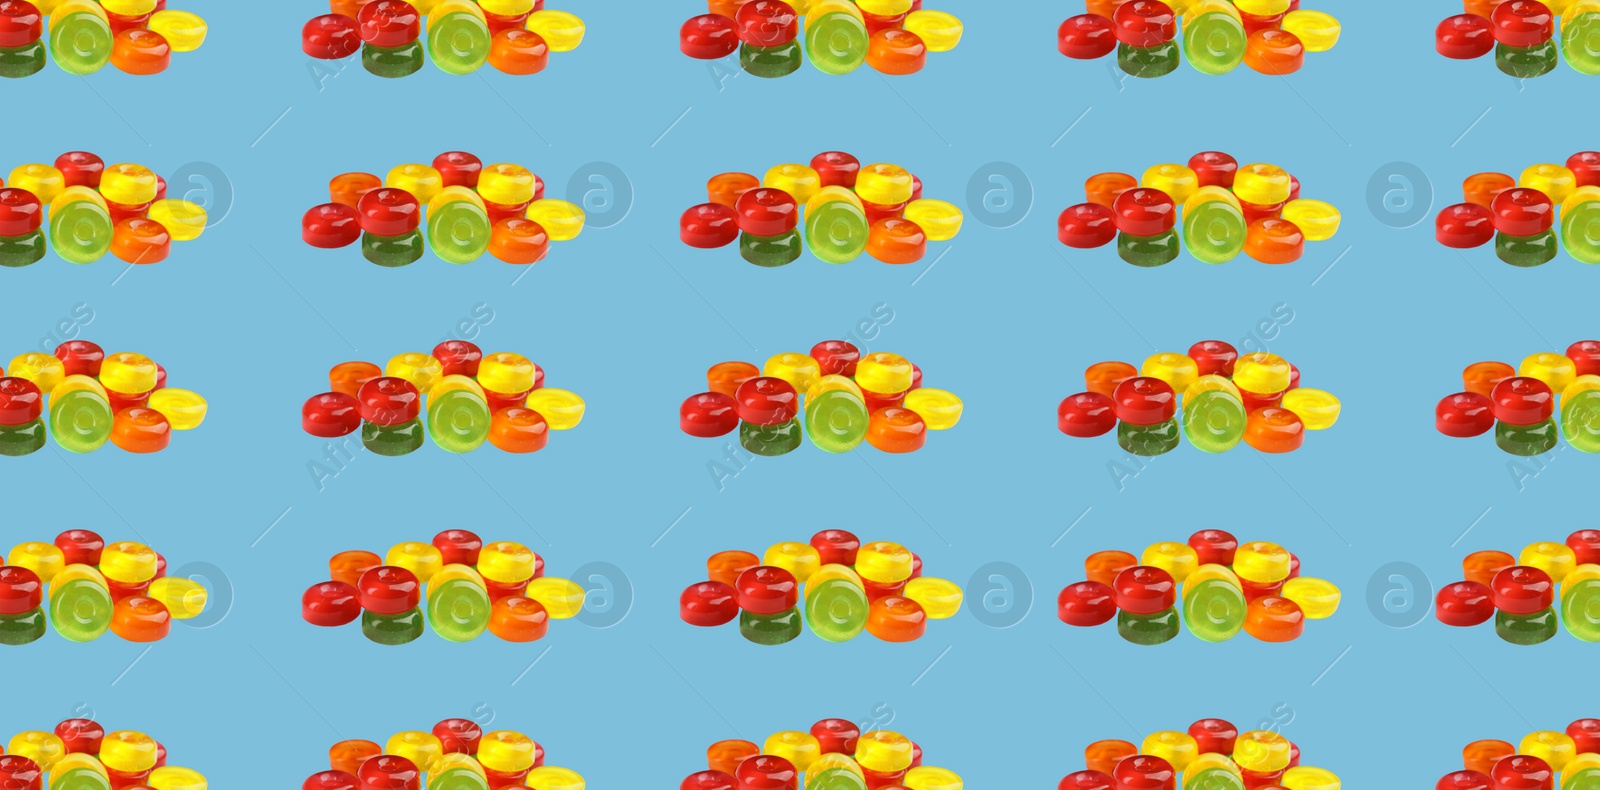 Image of Collage with tasty candies on light blue background, pattern design